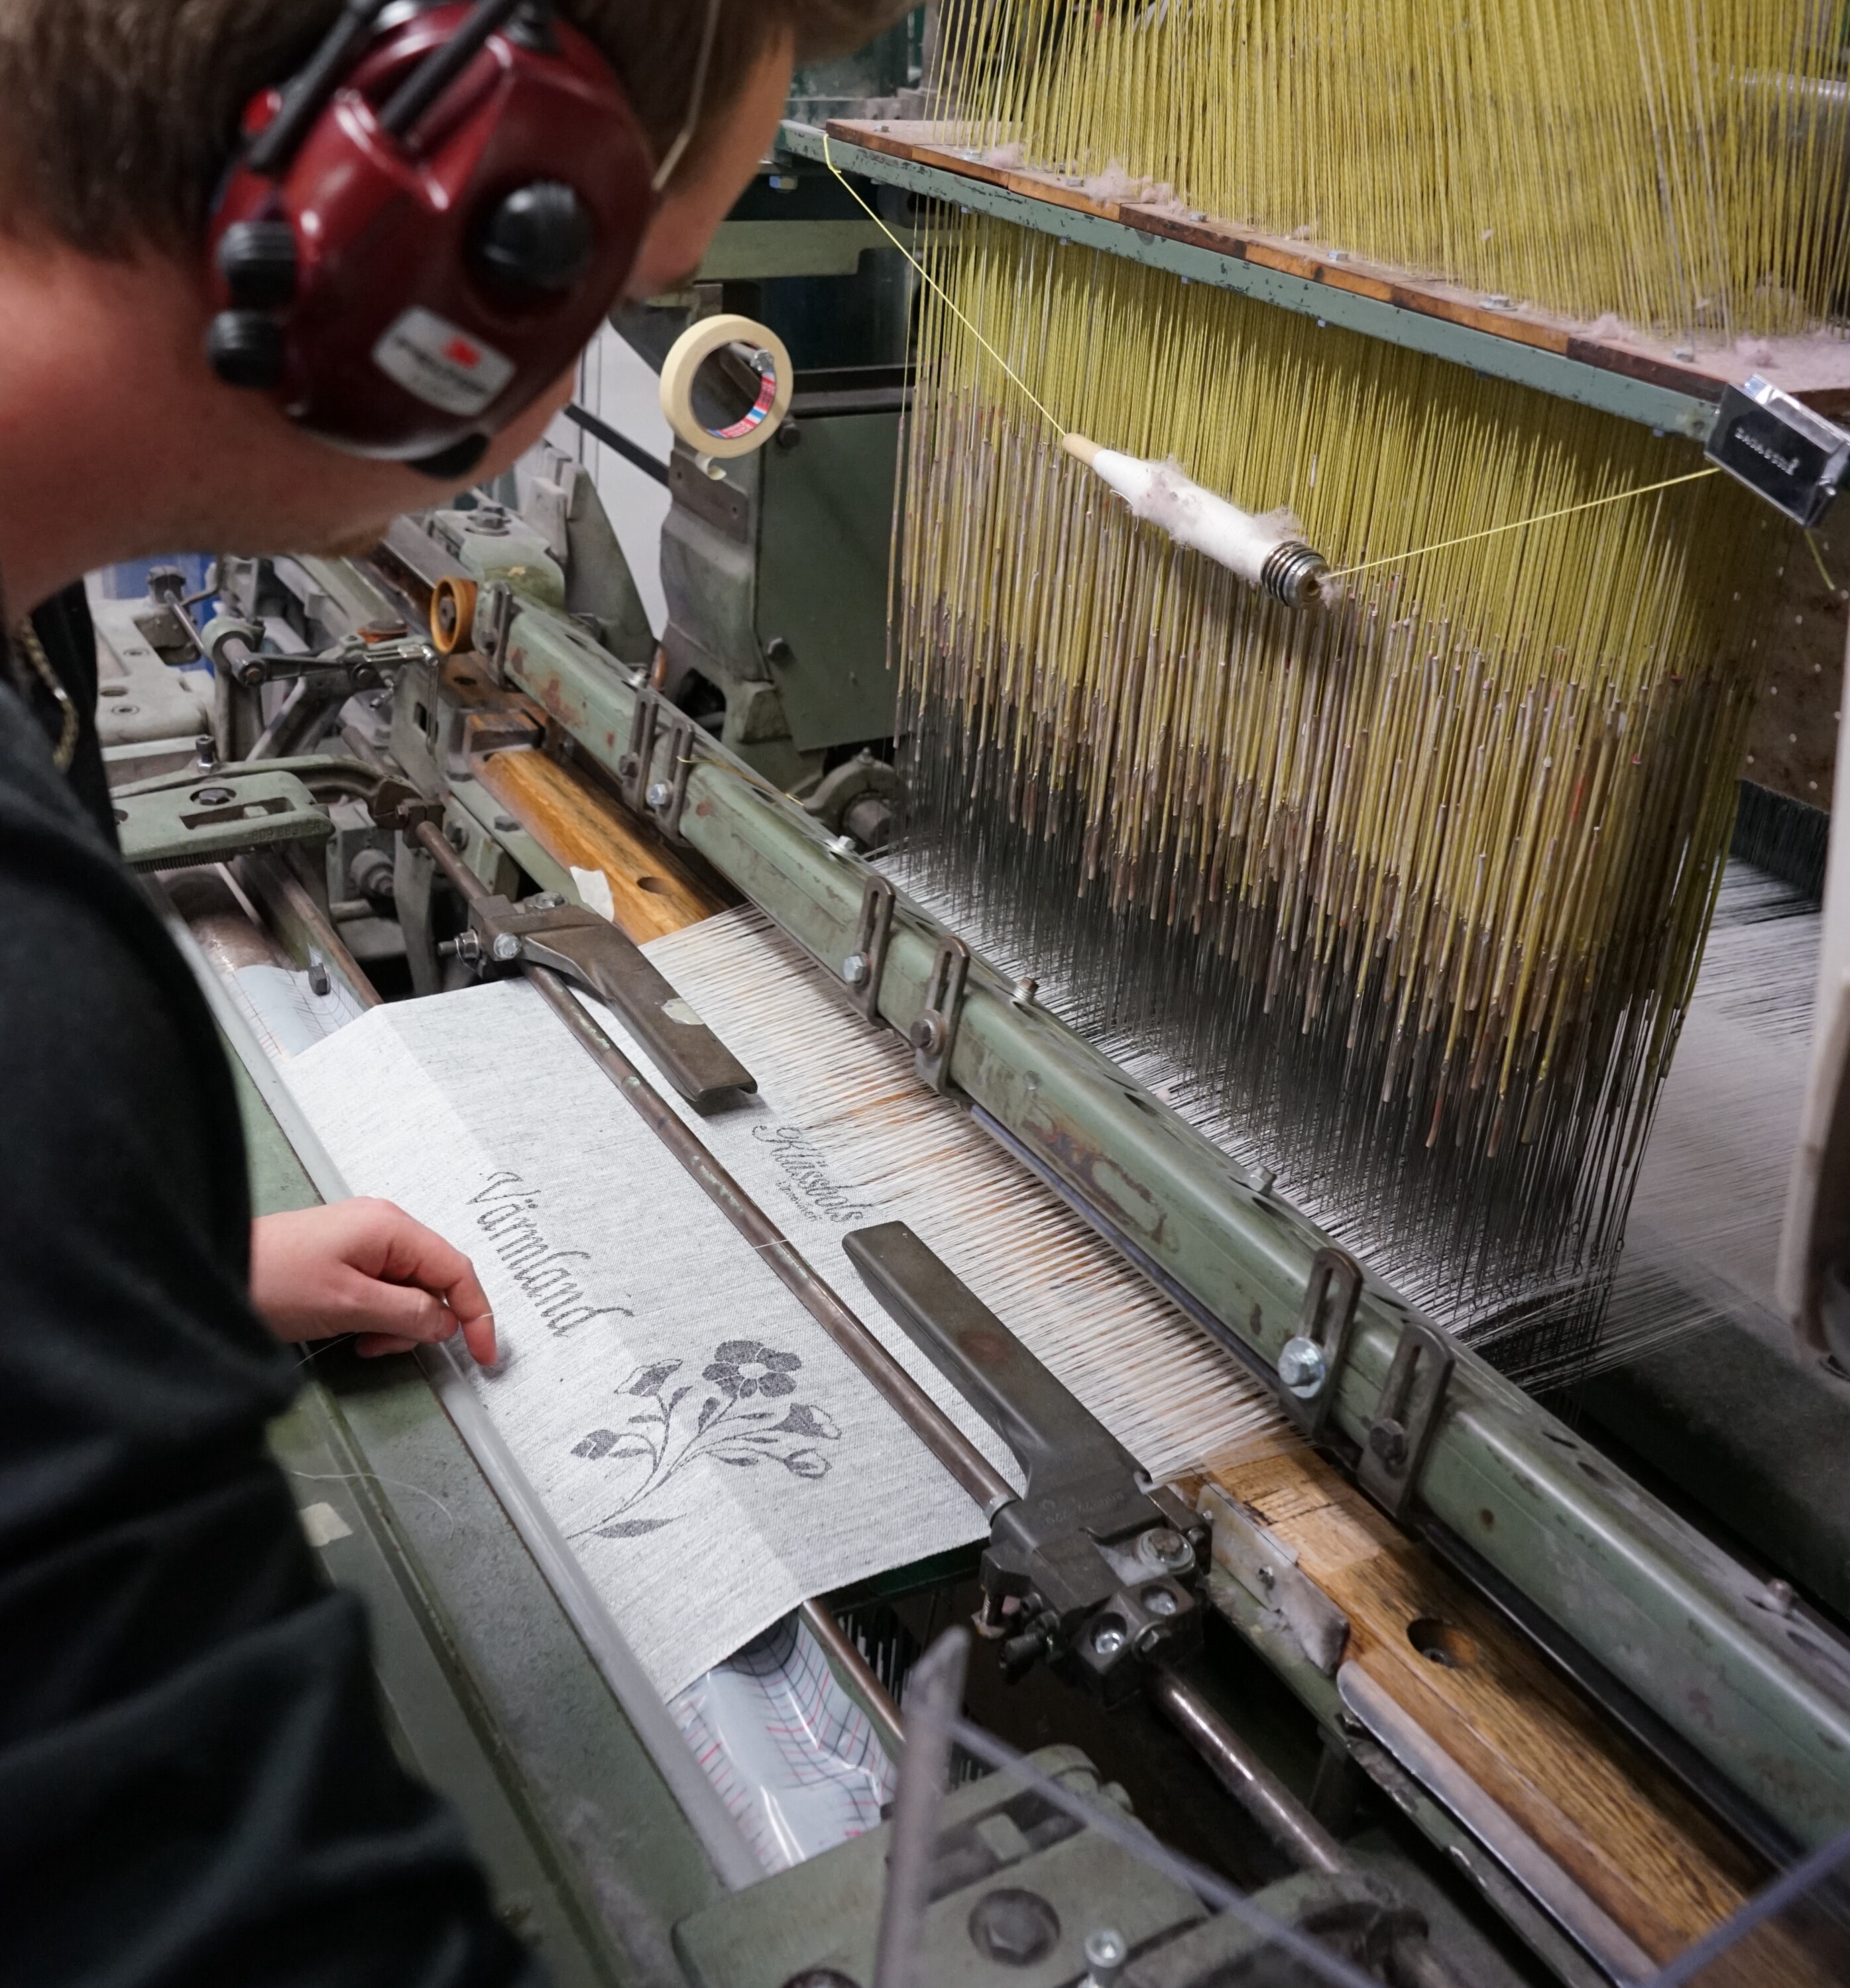 John at the loom. A textile is woven with a text that says Värmland 